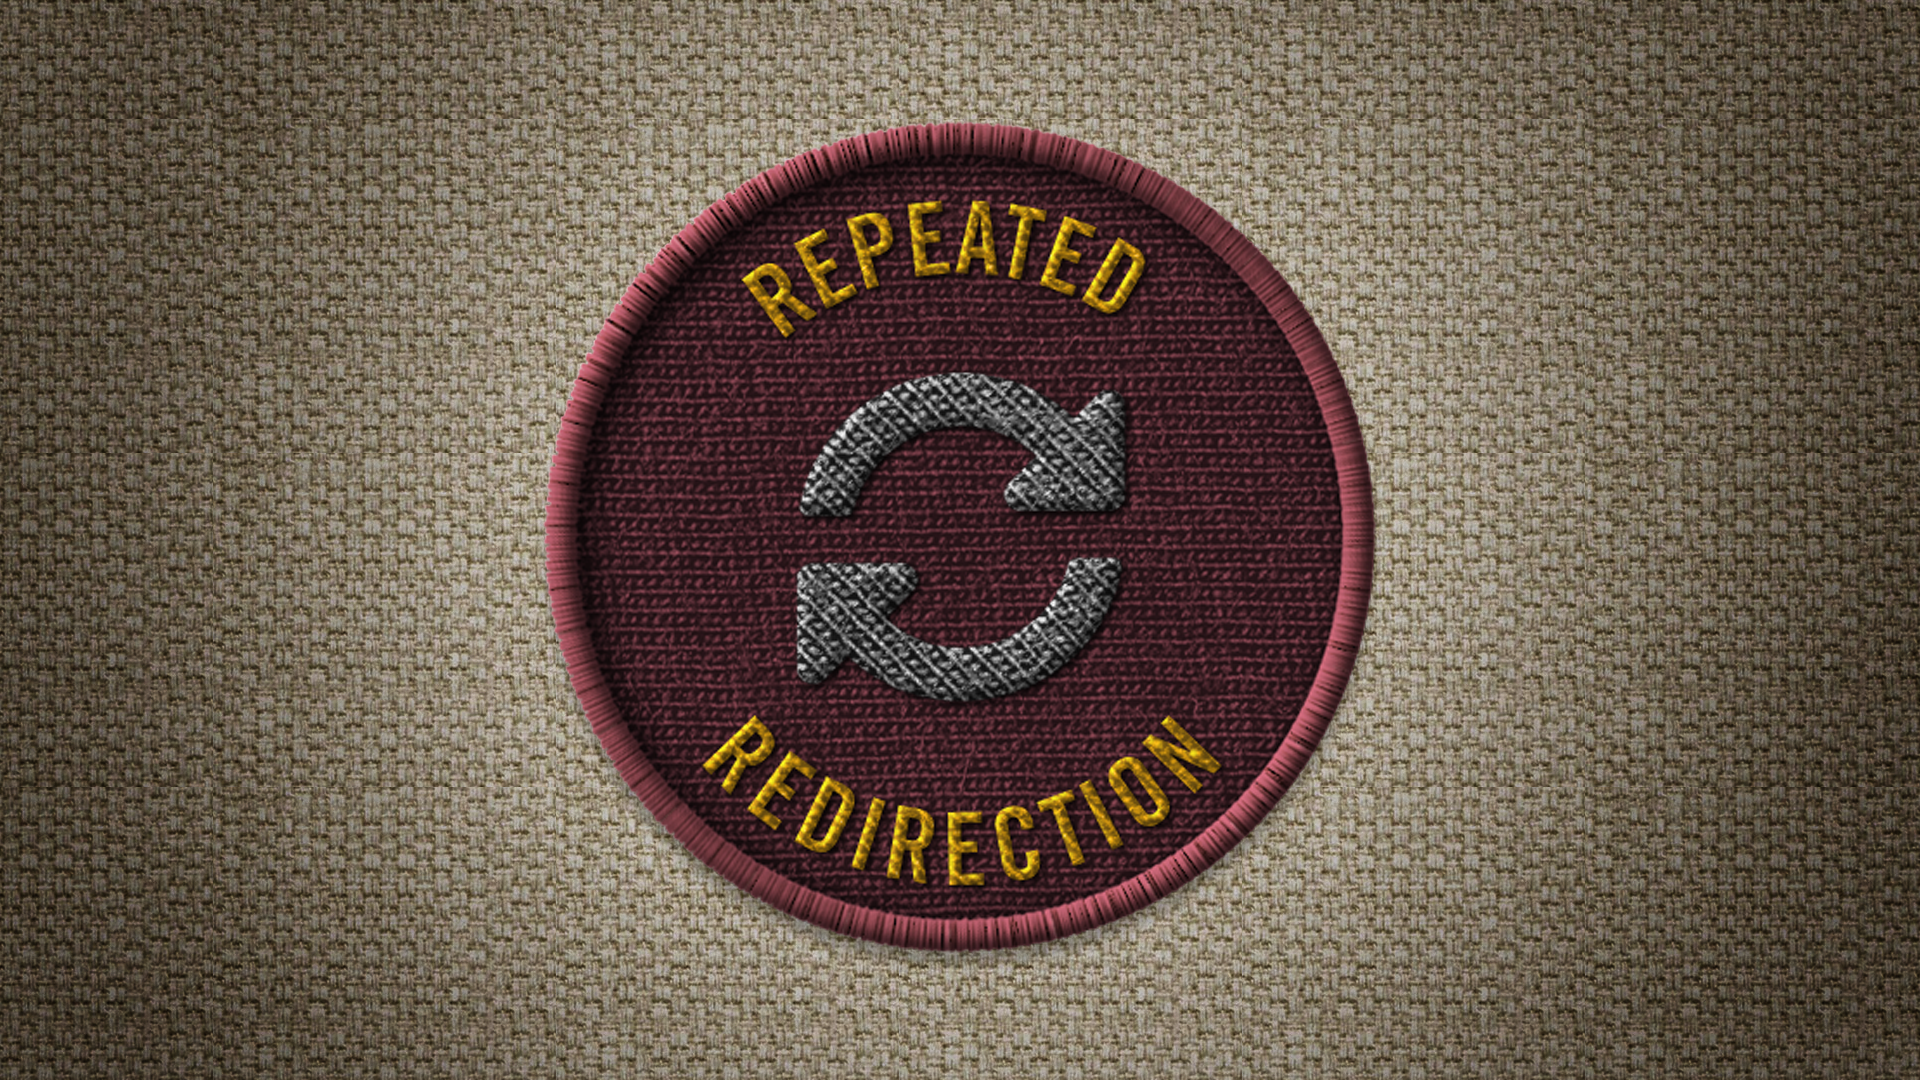 Icon for 301 redirector